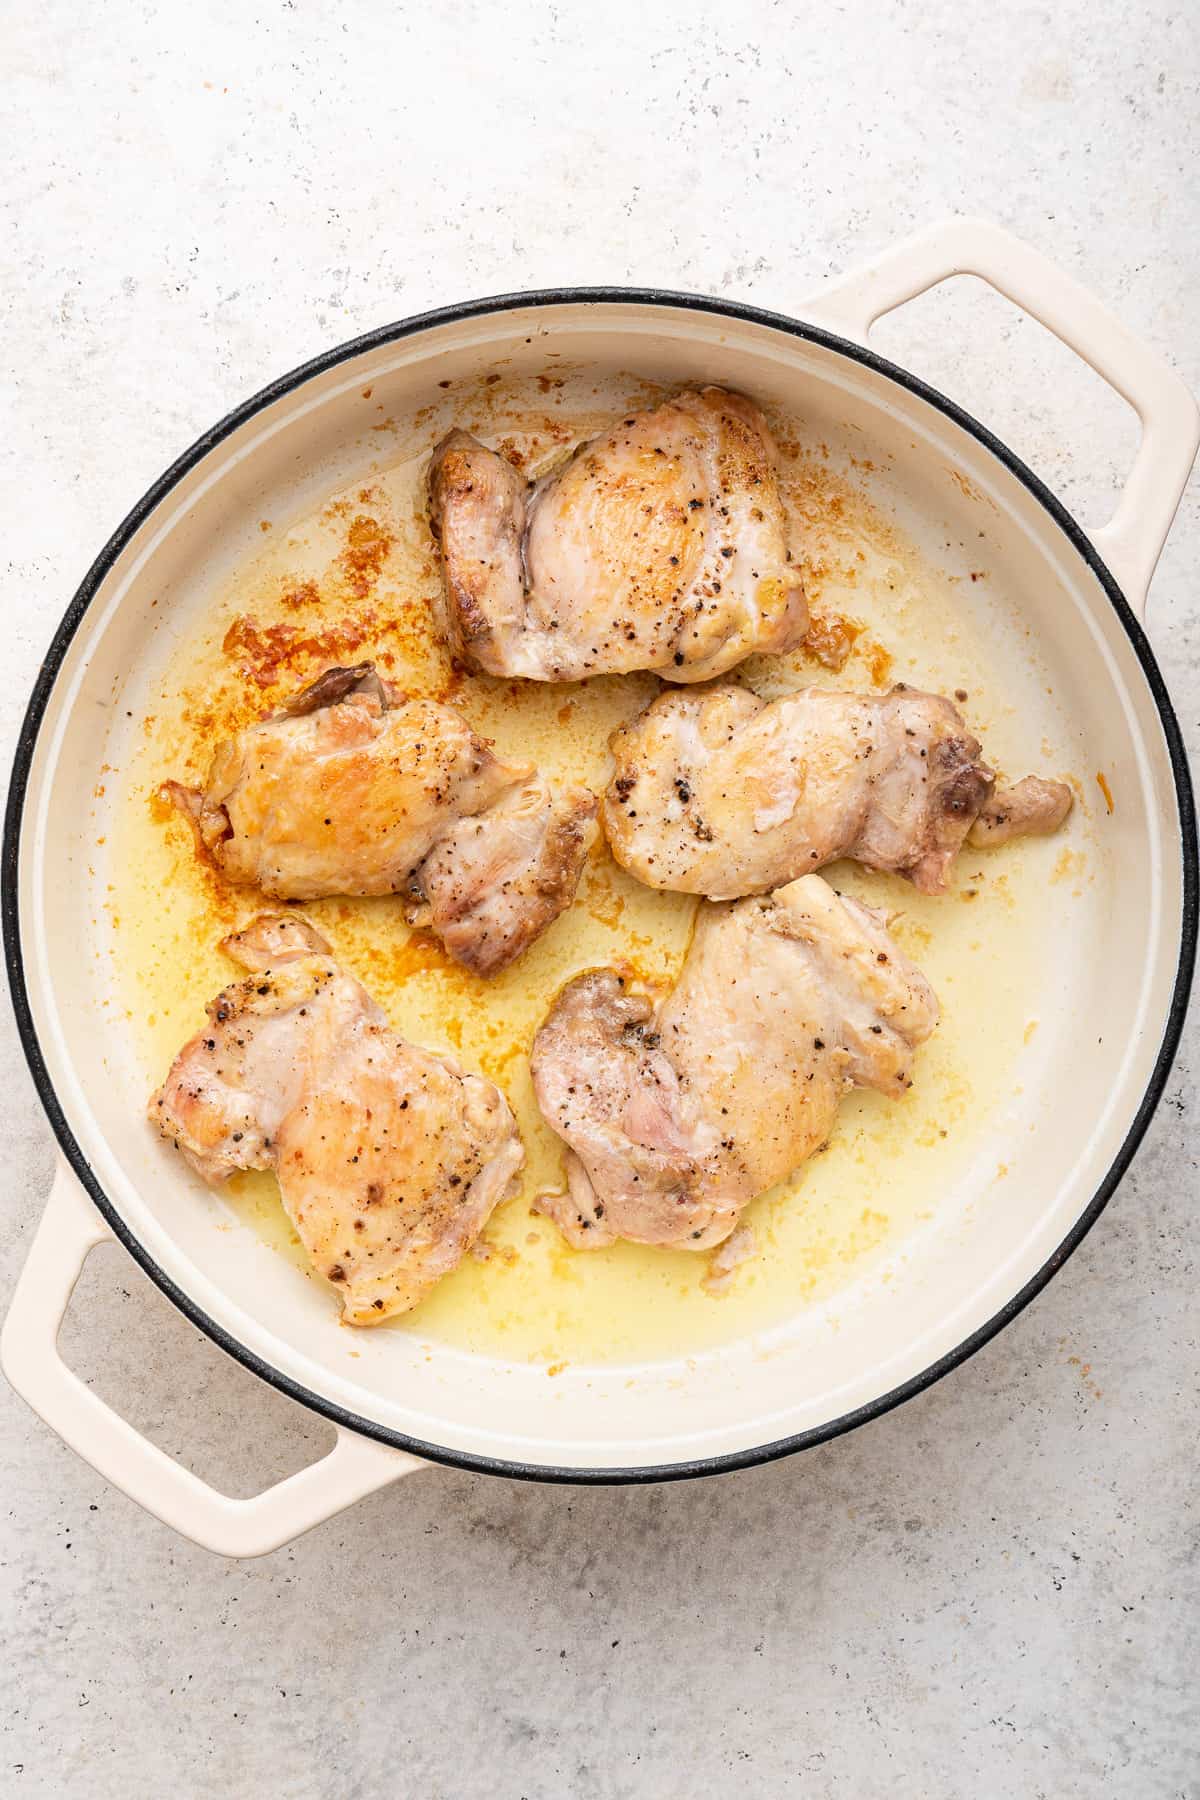 Sauteed chicken thighs in large pot.